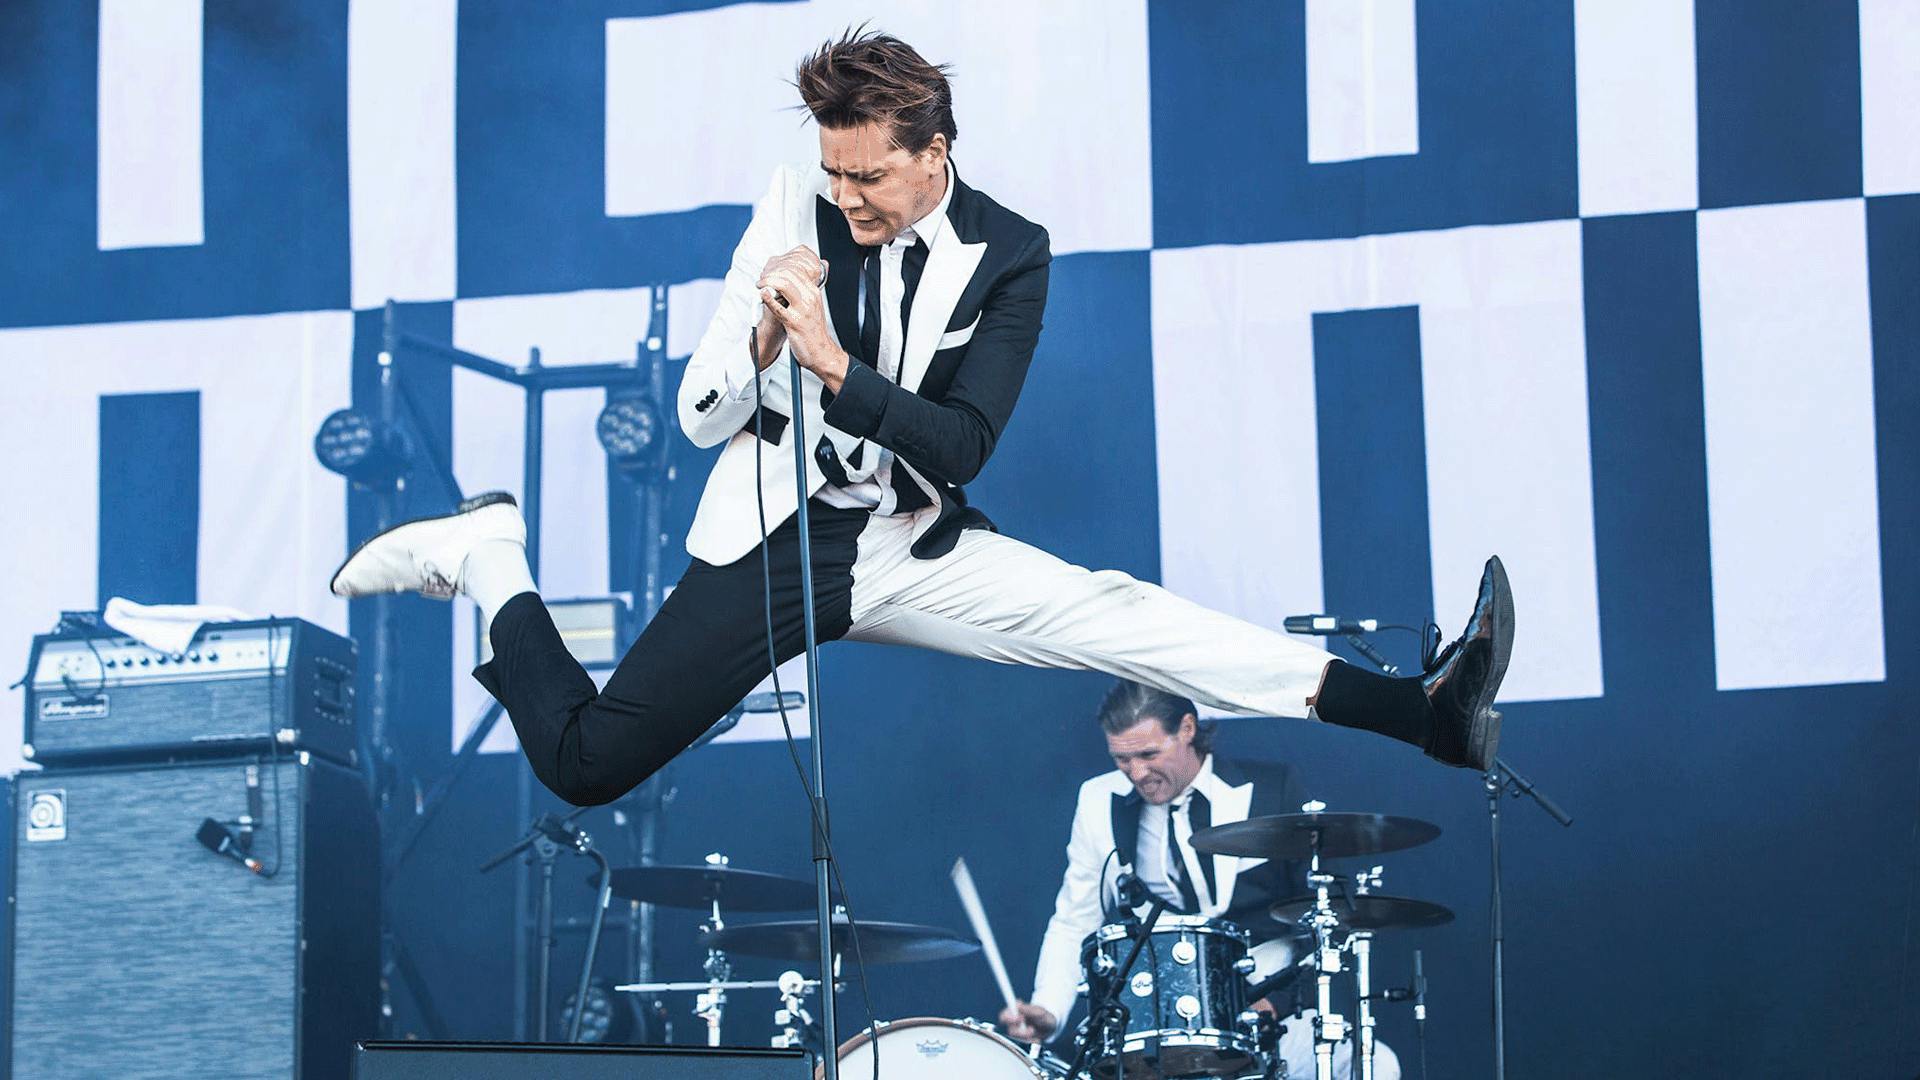 The Hives announce franchise rock shows for cover bands: “Let’s make business together and rock’n’roll”